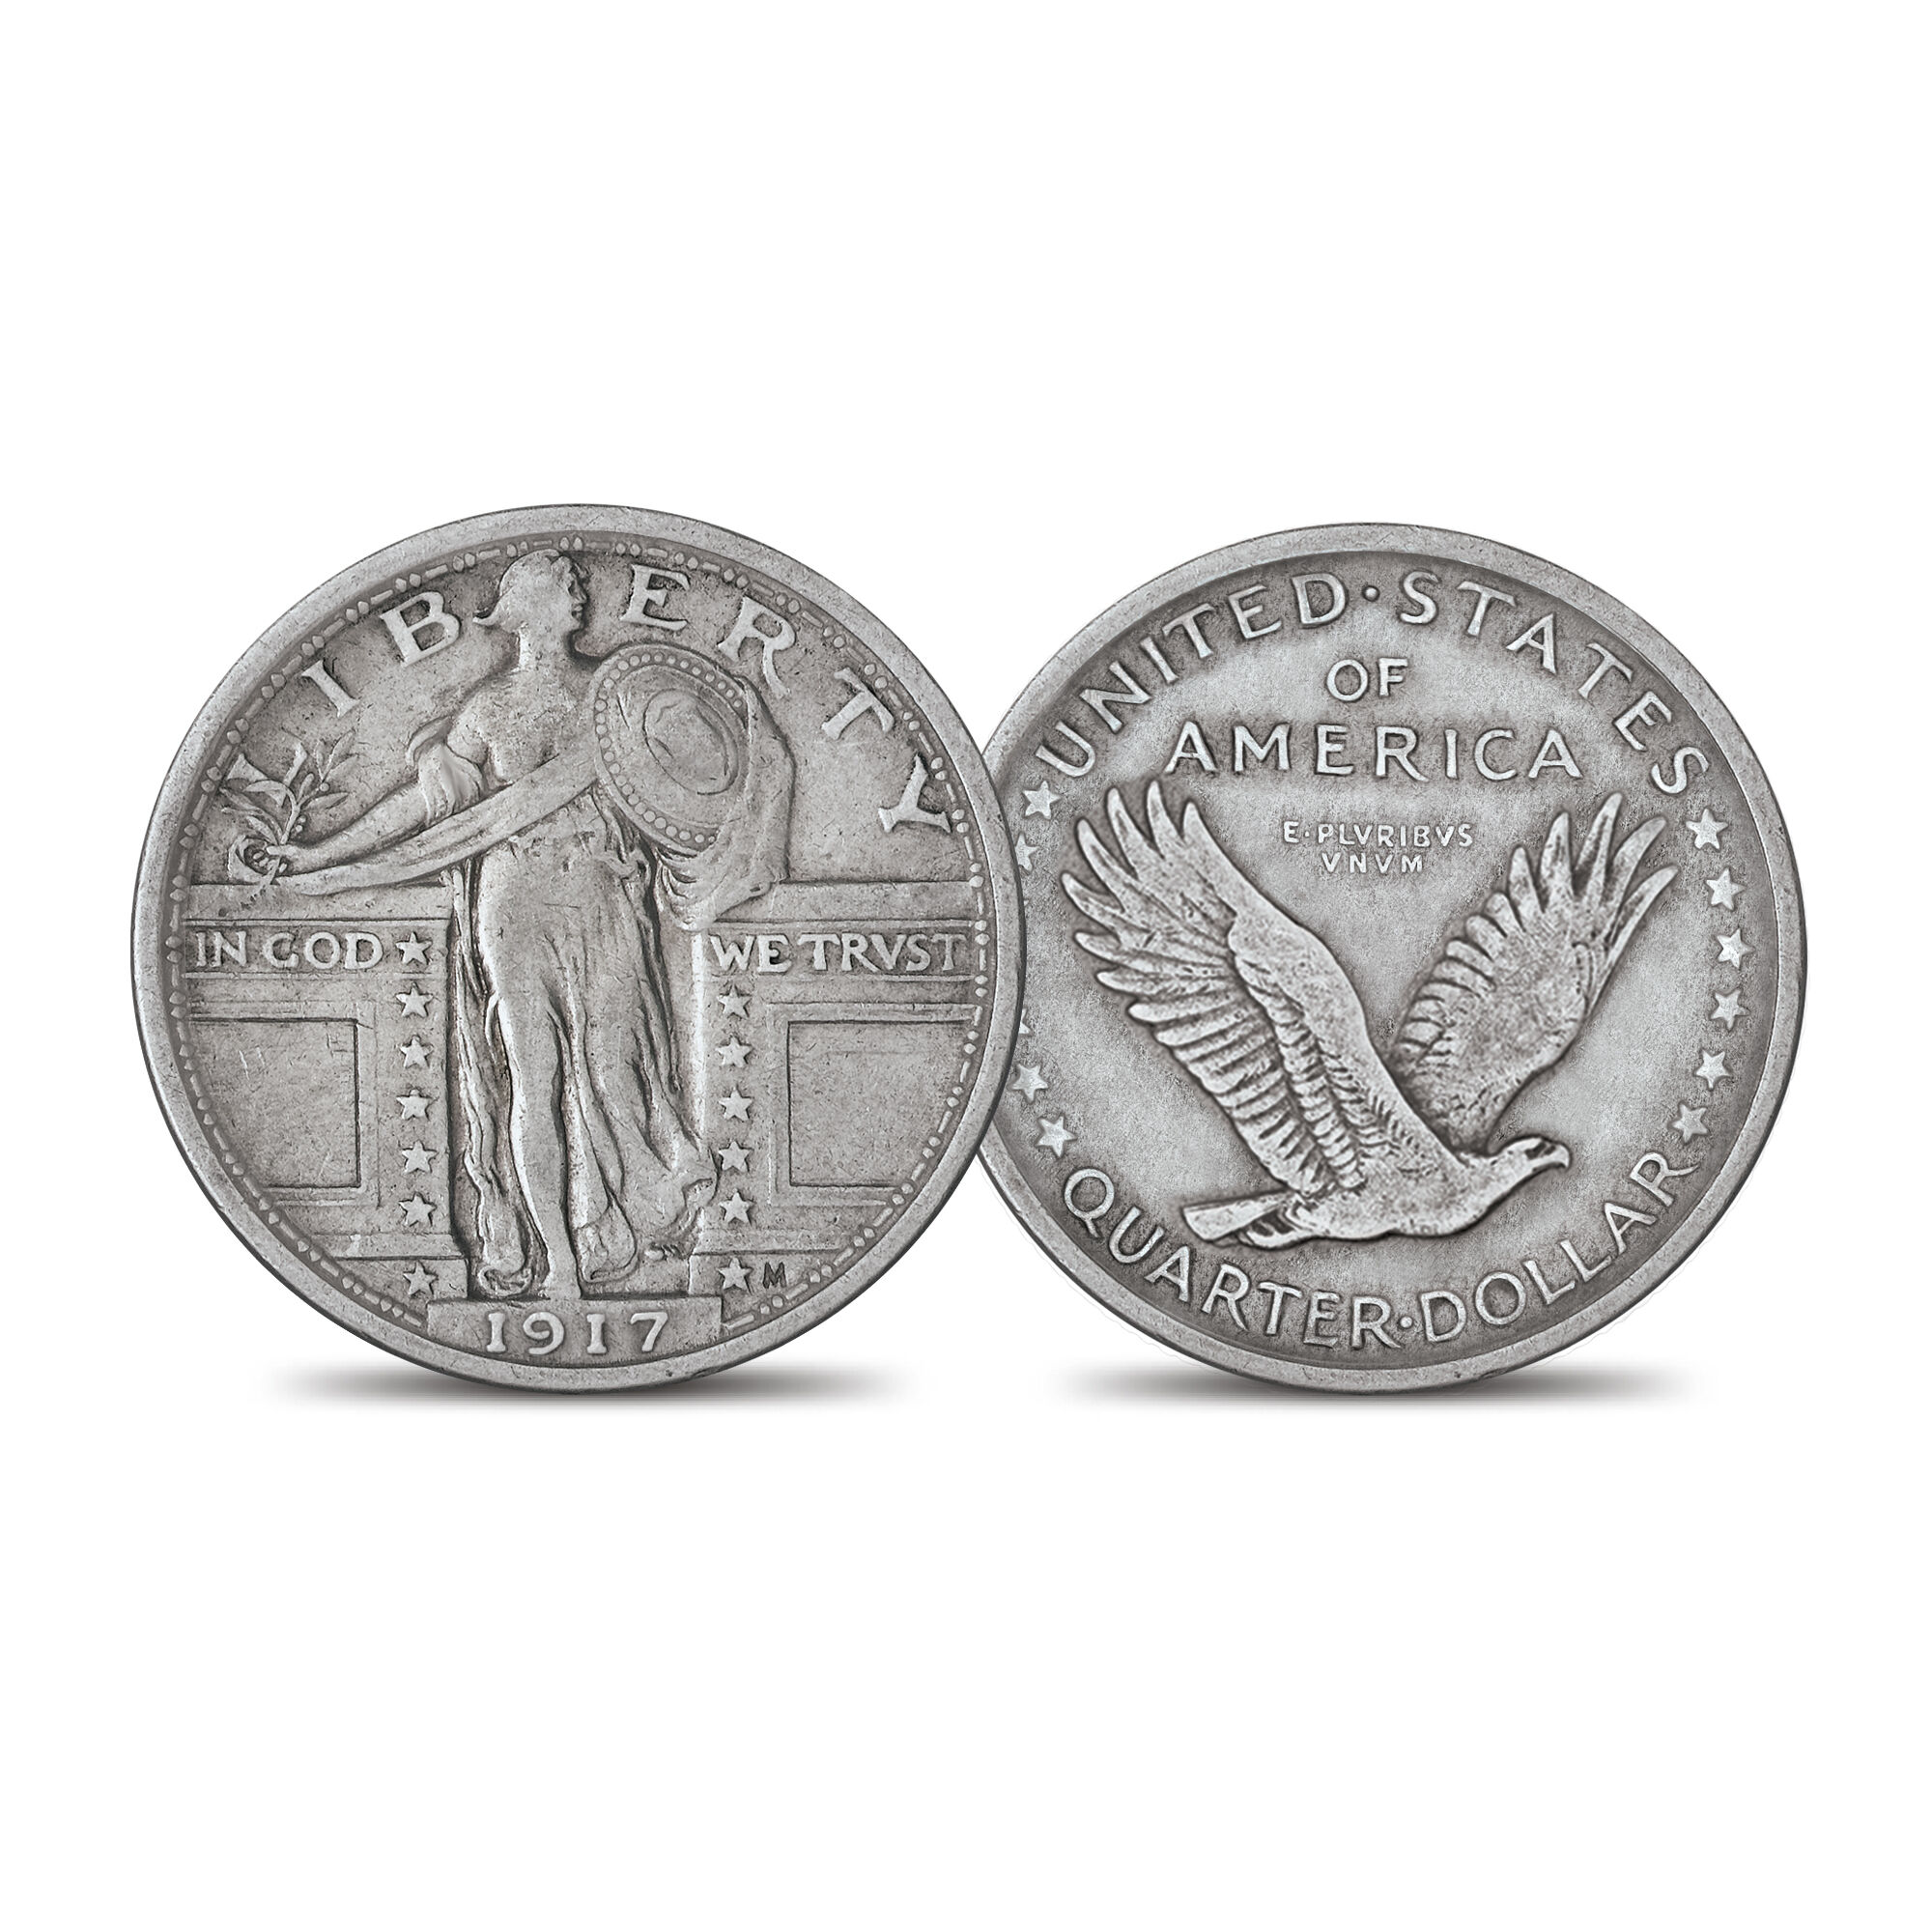 The 1917 Standing Liberty Silver Quarter Set 6811 0014 b type one